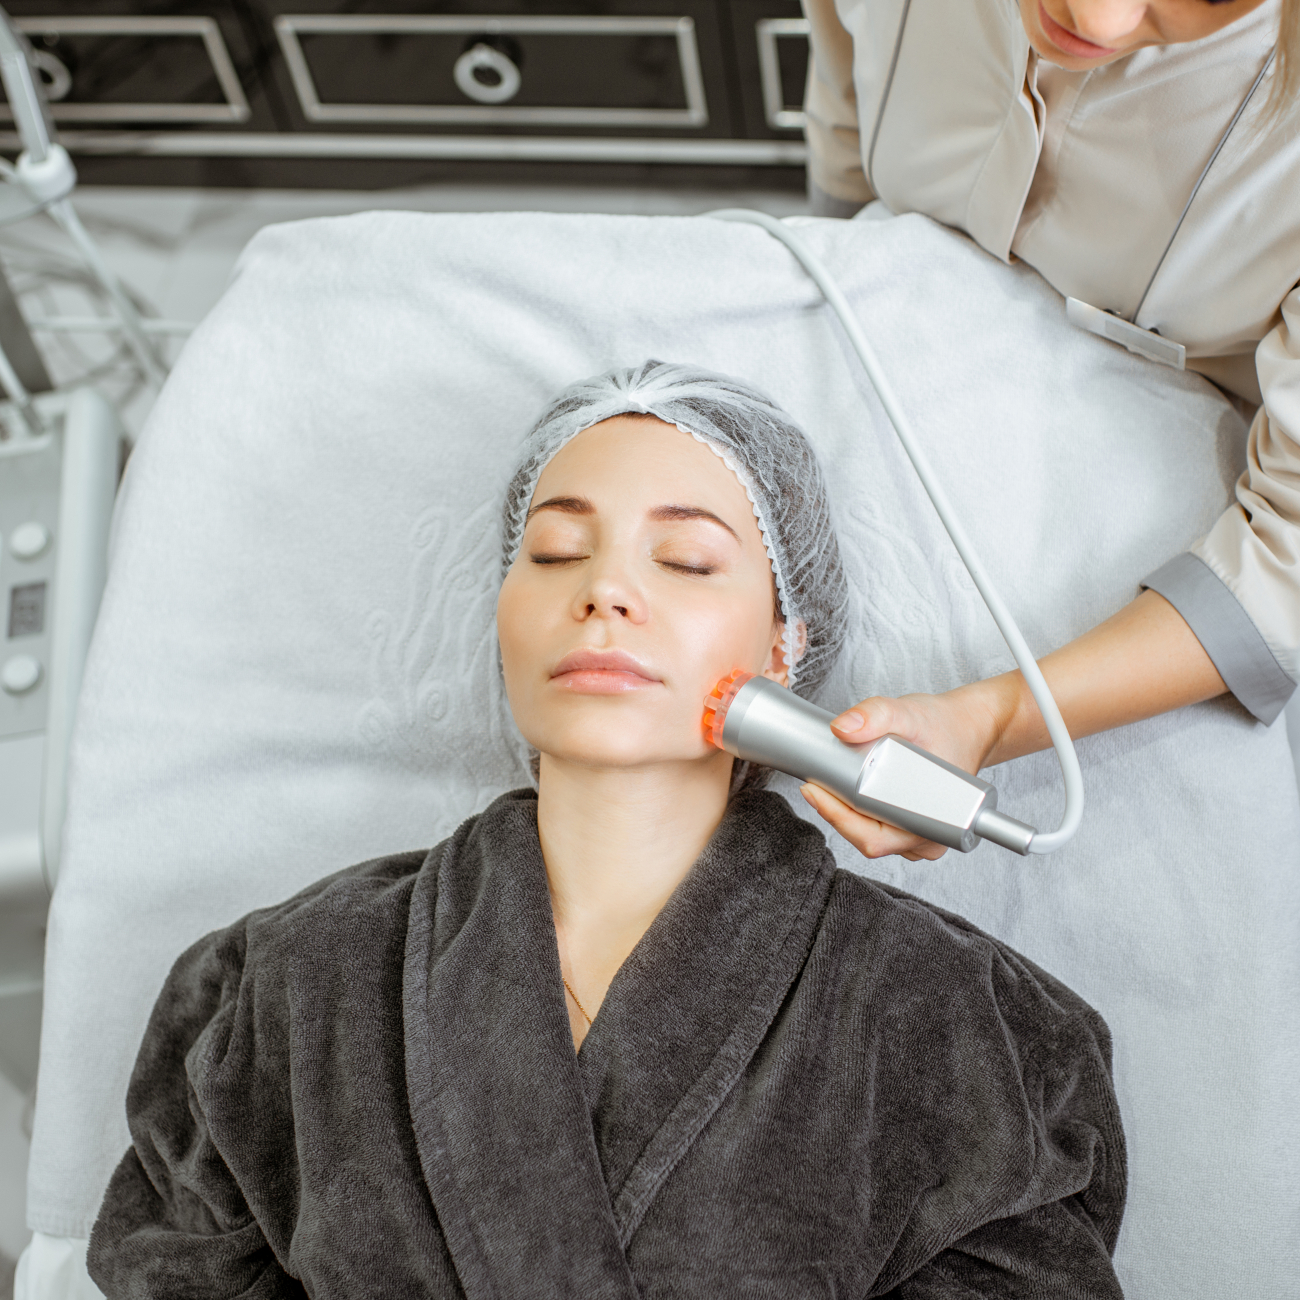 Woman on treatment bed receiving facial treatment